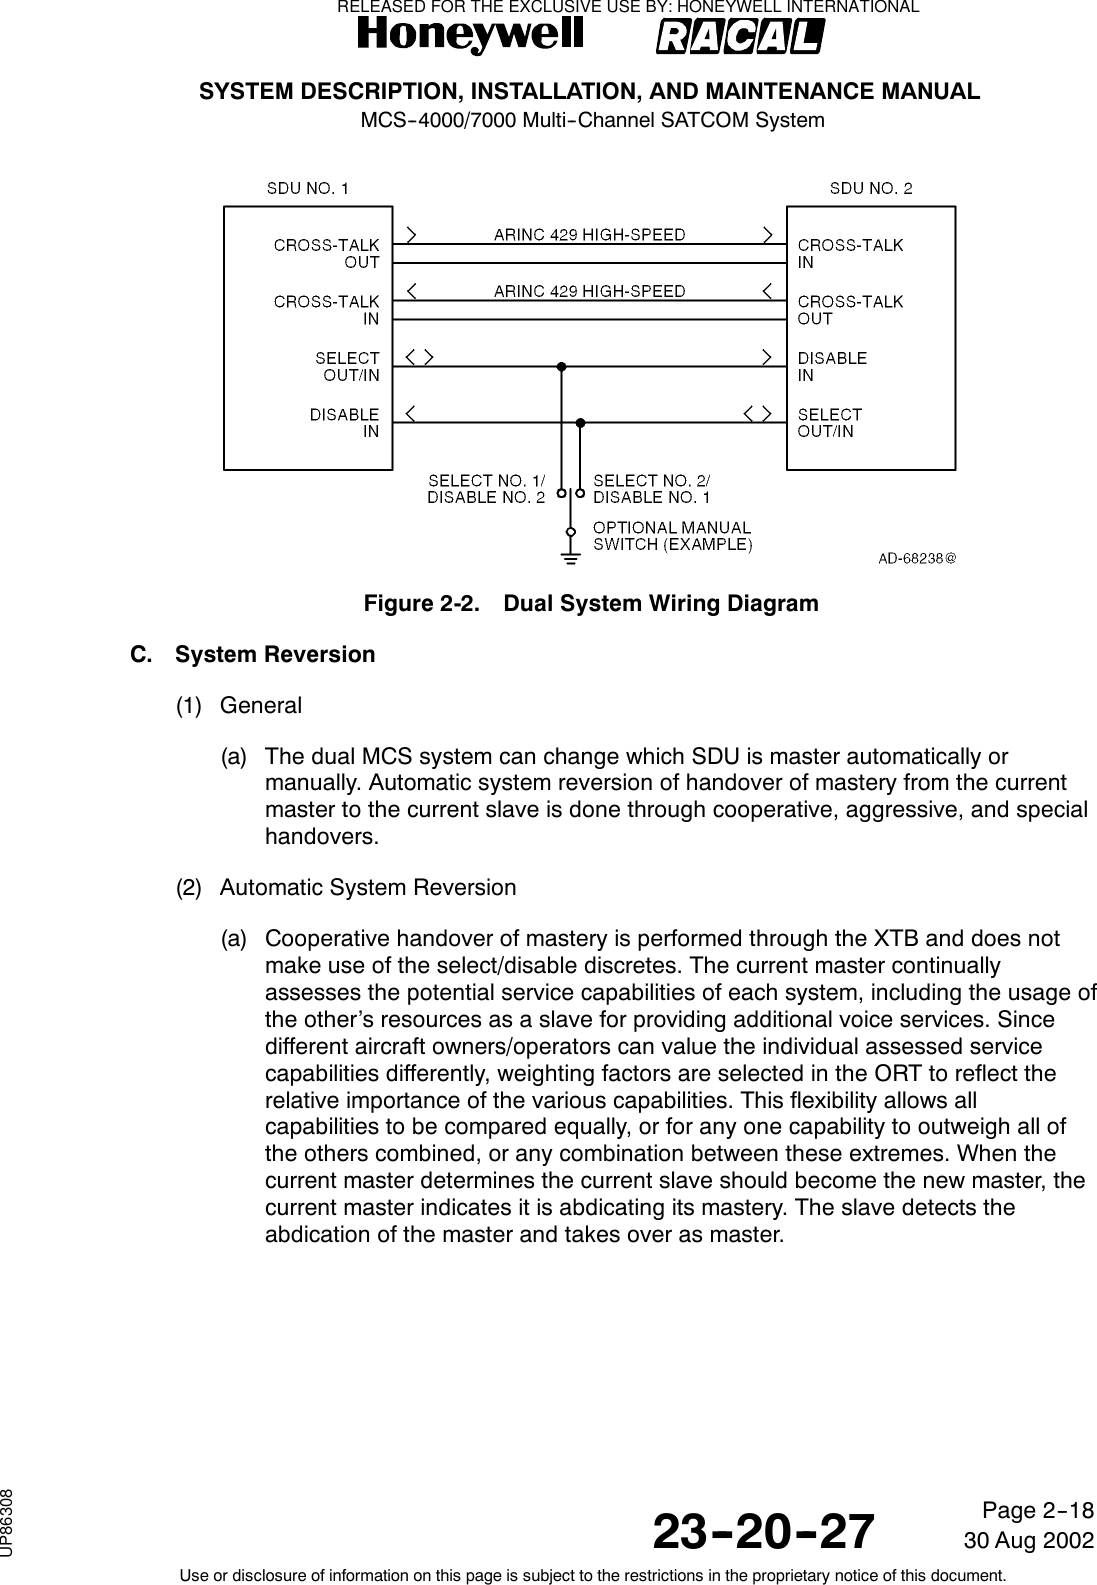 SYSTEM DESCRIPTION, INSTALLATION, AND MAINTENANCE MANUALMCS--4000/7000 Multi--Channel SATCOM System23--20--2730 Aug 2002Use or disclosure of information on this page is subject to the restrictions in the proprietary notice of this document.Page 2--18Figure 2-2. Dual System Wiring DiagramC. System Reversion(1) General(a) The dual MCS system can change which SDU is master automatically ormanually. Automatic system reversion of handover of mastery from the currentmaster to the current slave is done through cooperative, aggressive, and specialhandovers.(2) Automatic System Reversion(a) Cooperative handover of mastery is performed through the XTB and does notmake use of the select/disable discretes. The current master continuallyassesses the potential service capabilities of each system, including the usage ofthe other’s resources as a slave for providing additional voice services. Sincedifferent aircraft owners/operators can value the individual assessed servicecapabilities differently, weighting factors are selected in the ORT to reflect therelative importance of the various capabilities. This flexibility allows allcapabilities to be compared equally, or for any one capability to outweigh all ofthe others combined, or any combination between these extremes. When thecurrent master determines the current slave should become the new master, thecurrent master indicates it is abdicating its mastery. The slave detects theabdication of the master and takes over as master.RELEASED FOR THE EXCLUSIVE USE BY: HONEYWELL INTERNATIONALUP86308